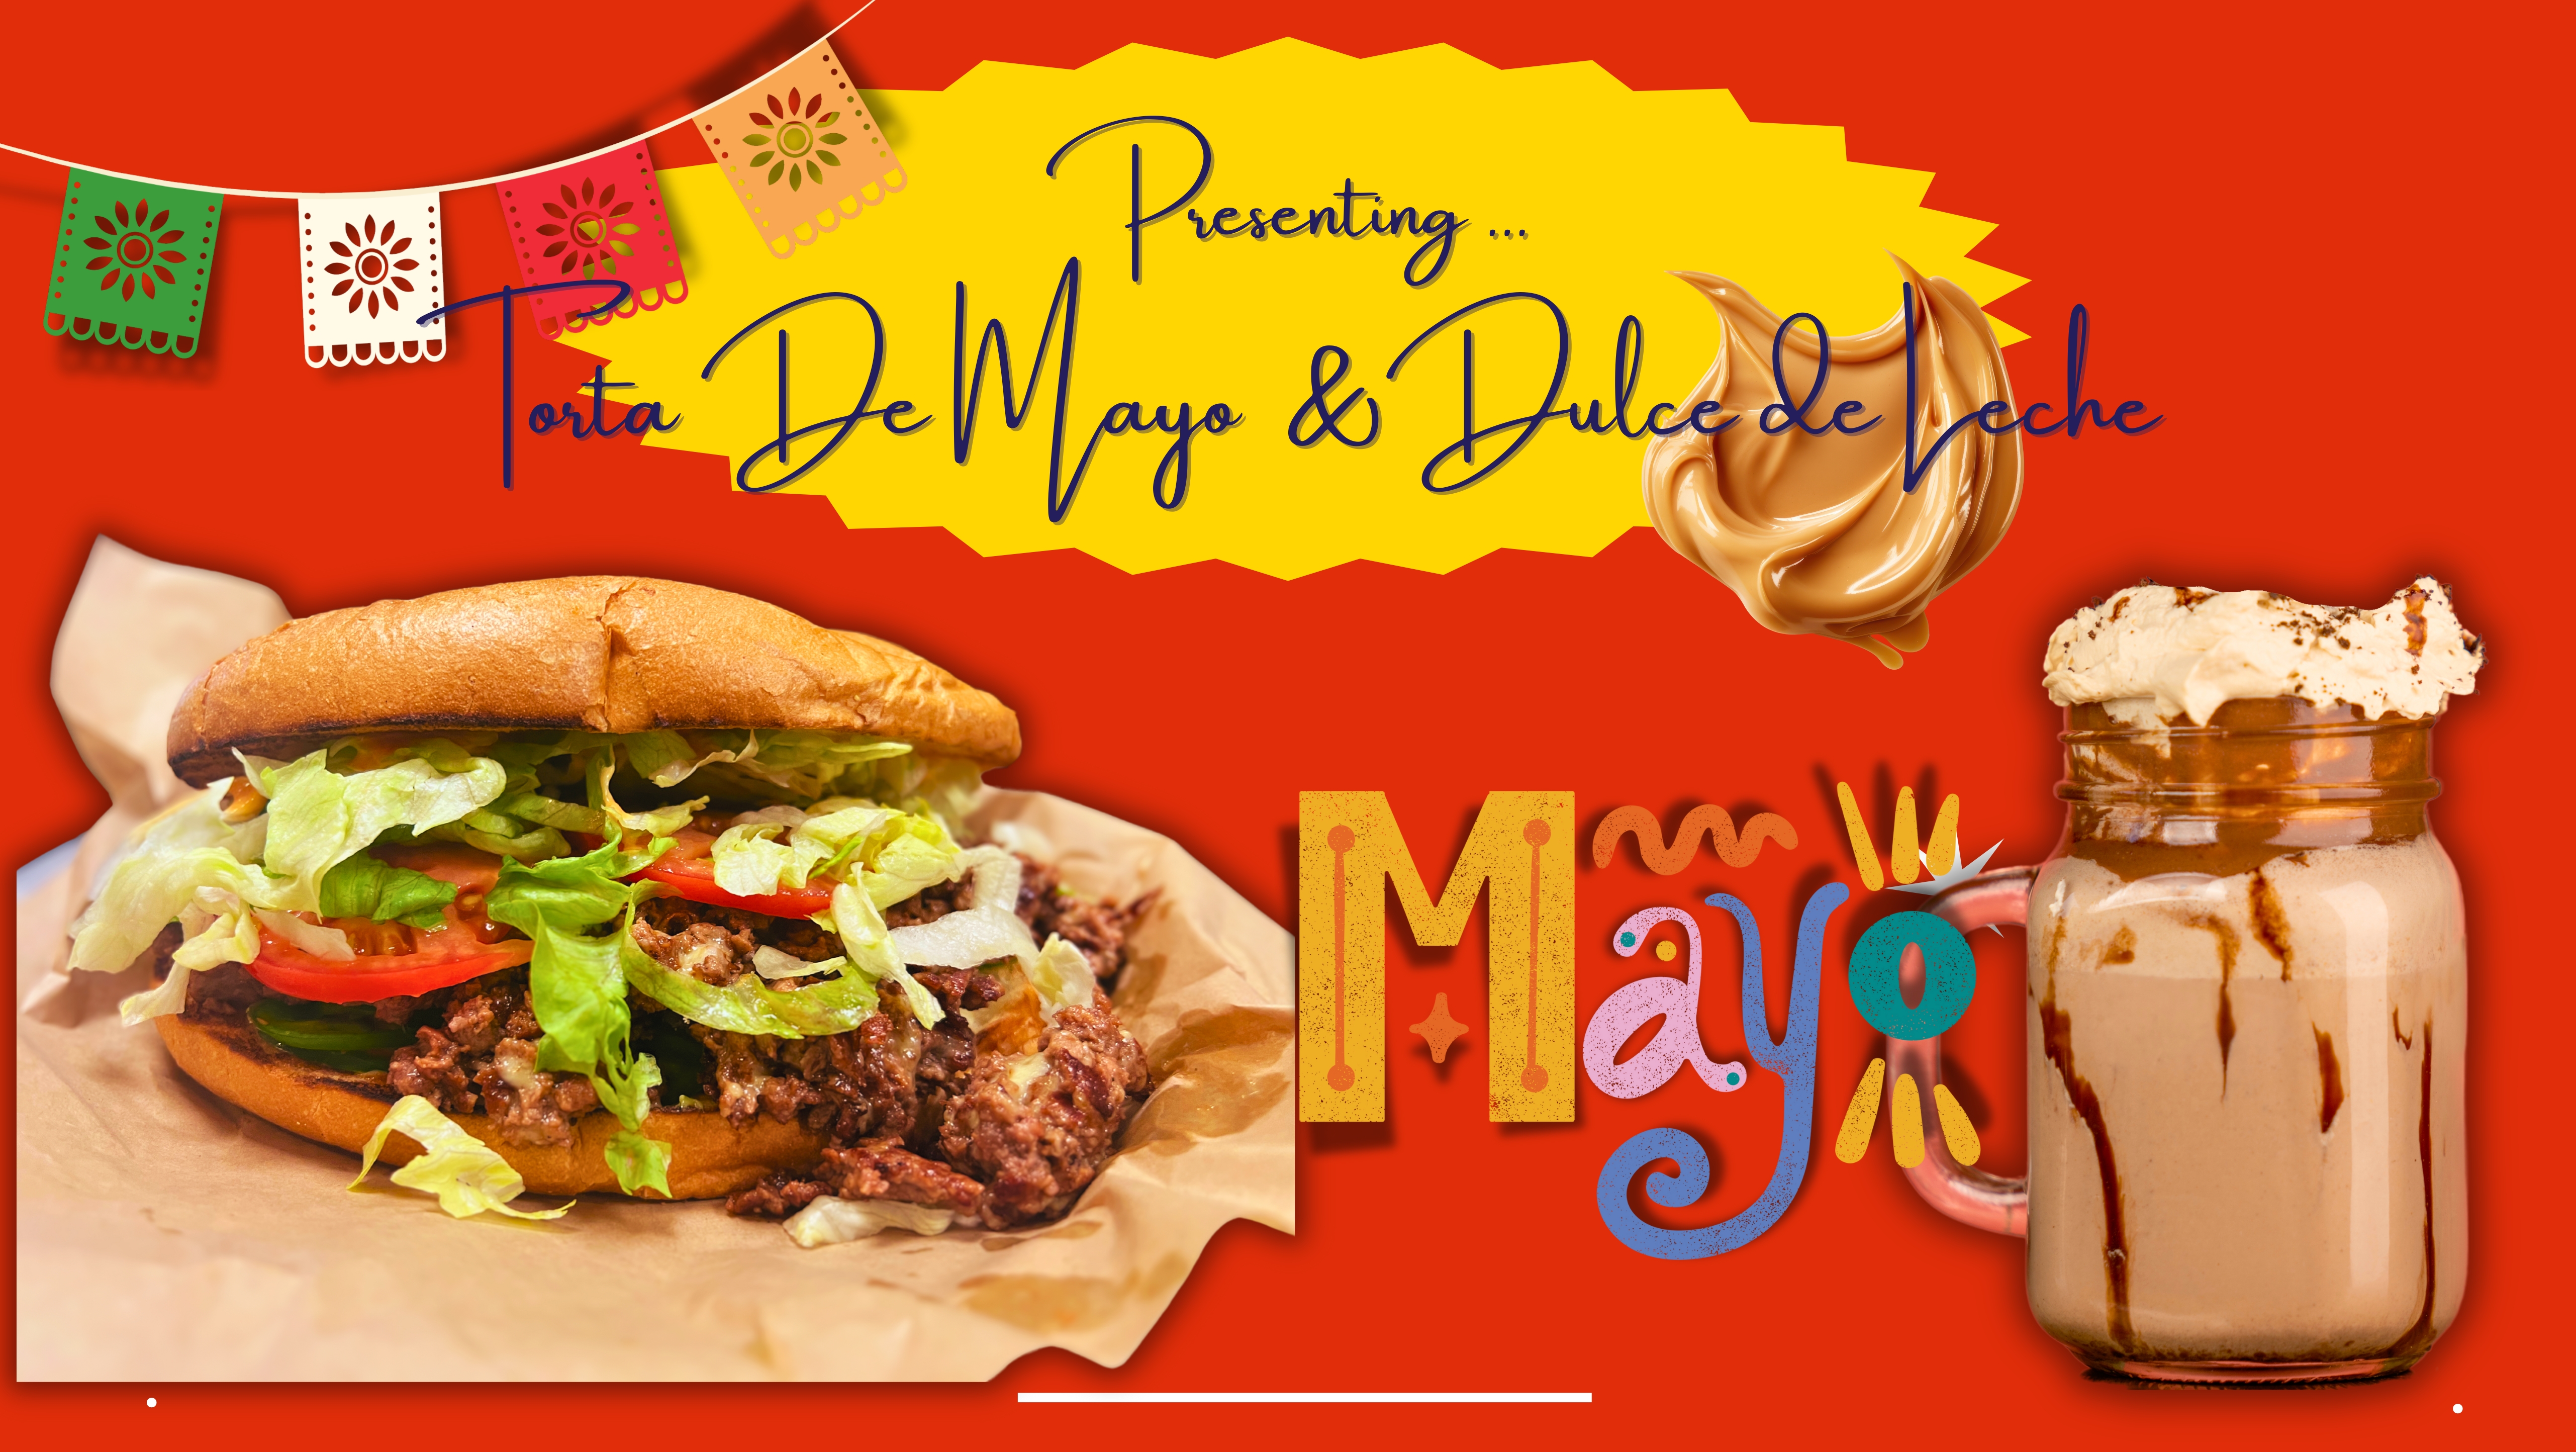 Indulge in the taste of Mexico with our special Torta de Mayo Sandwich & Dulce de Leche shake...